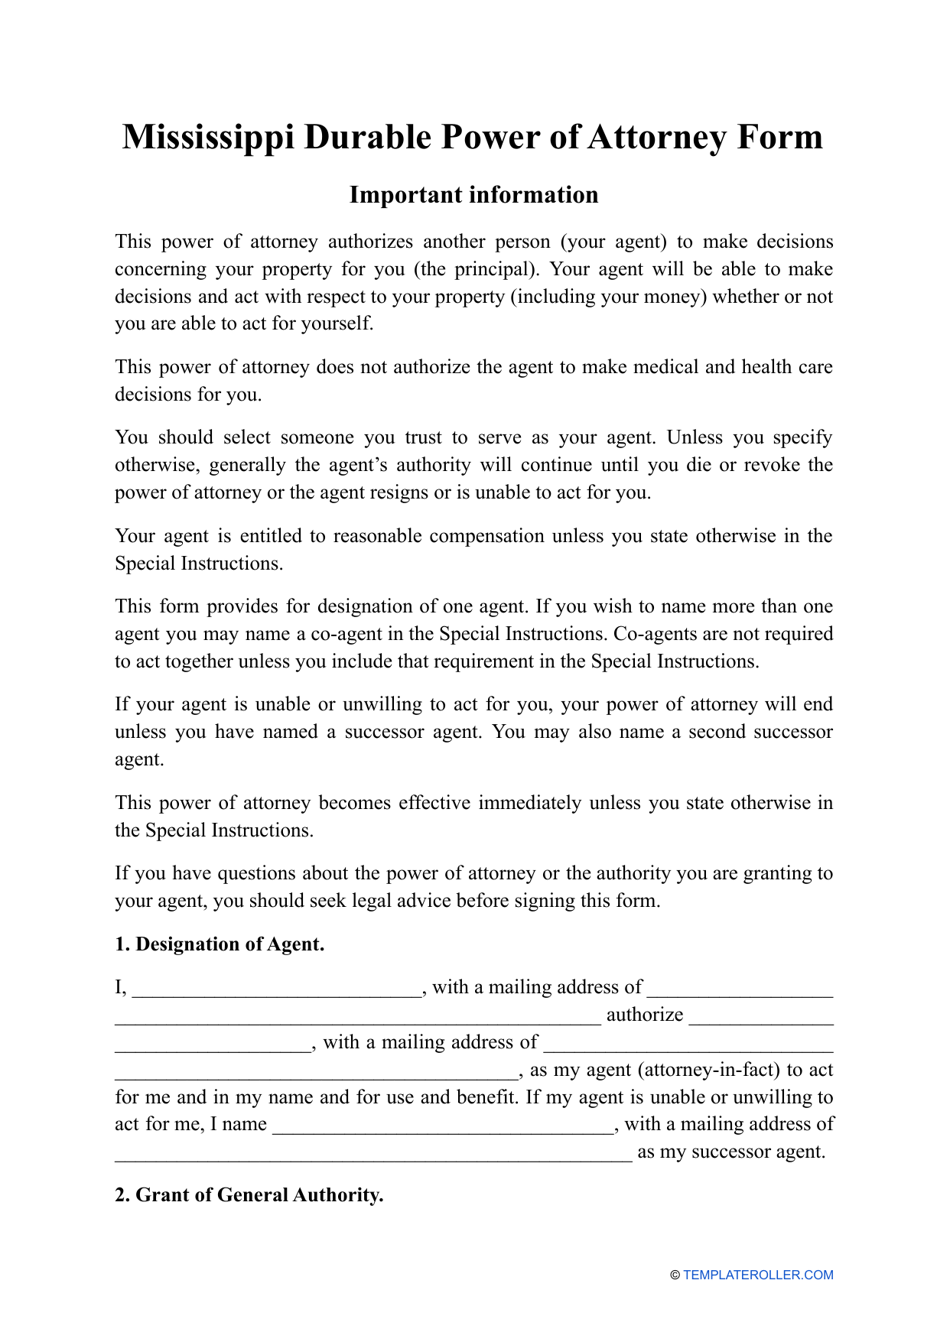 Durable Power of Attorney Form - Mississippi, Page 1